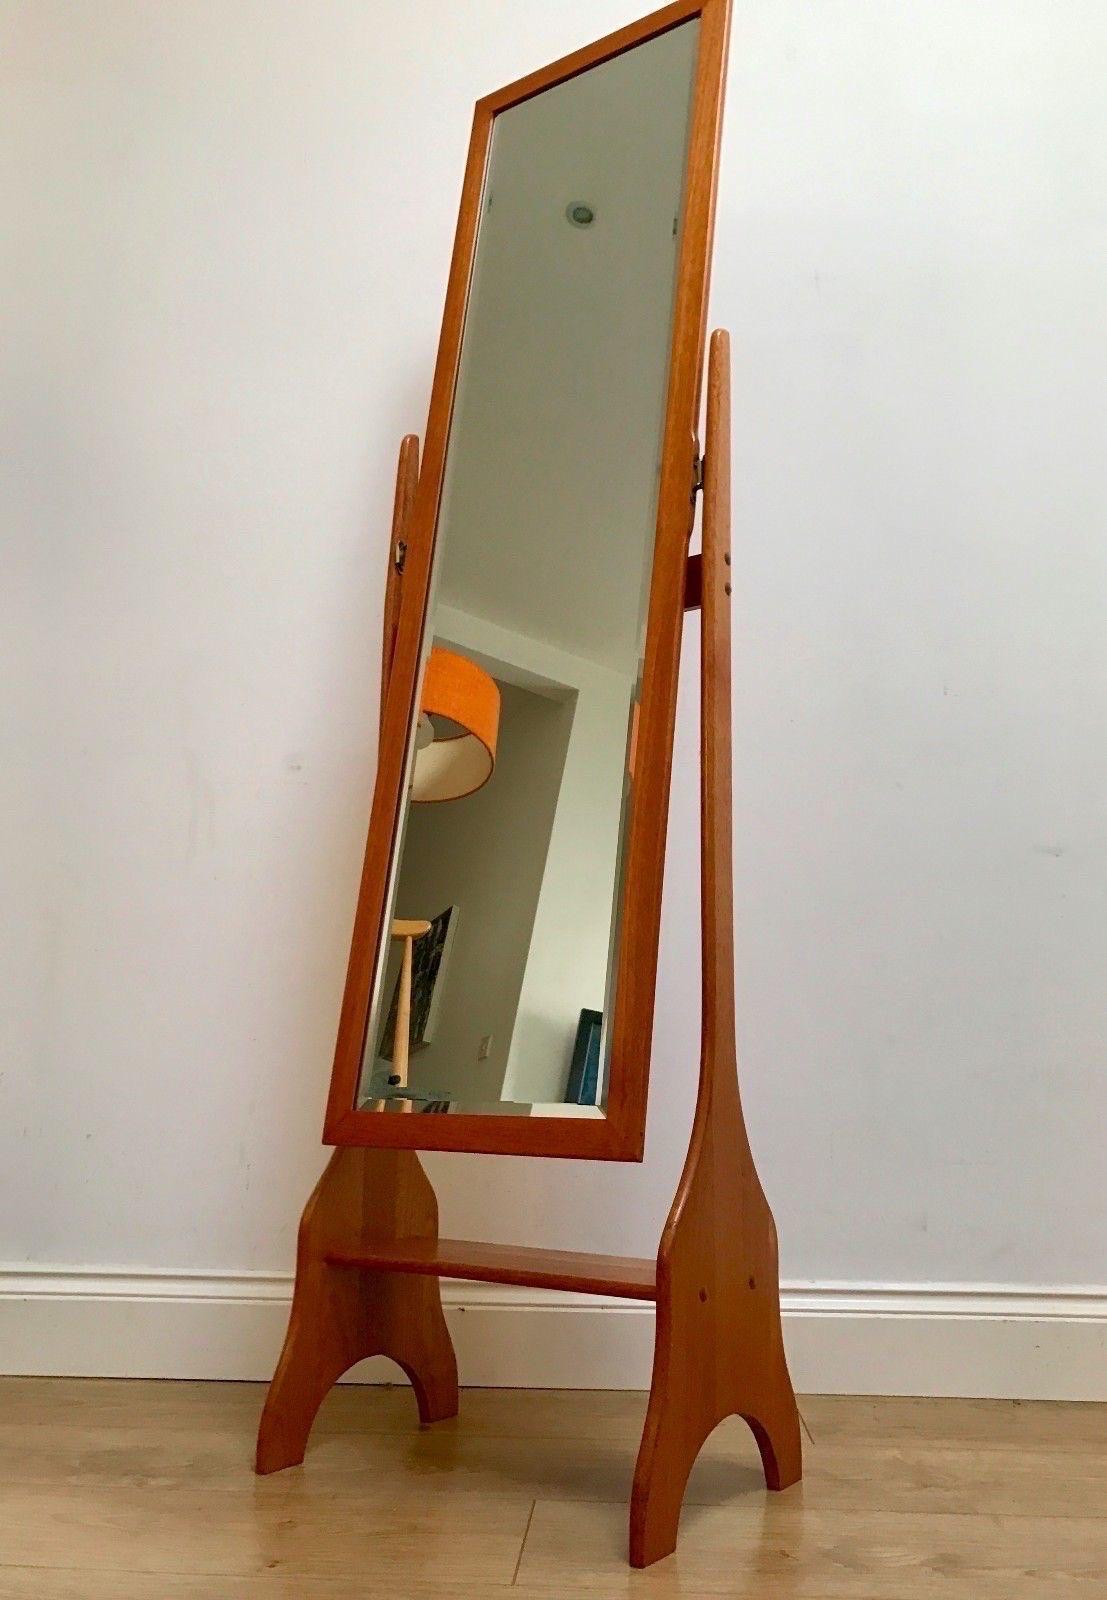 1960s Danish-influenced free-standing cheval mirror with solid teak frame and stand. Can be angled as required; mirror can be removed. Measures : 41cm wide, 28cm deep, 153cm high. Very good condition for age A good quality and useful midcentury